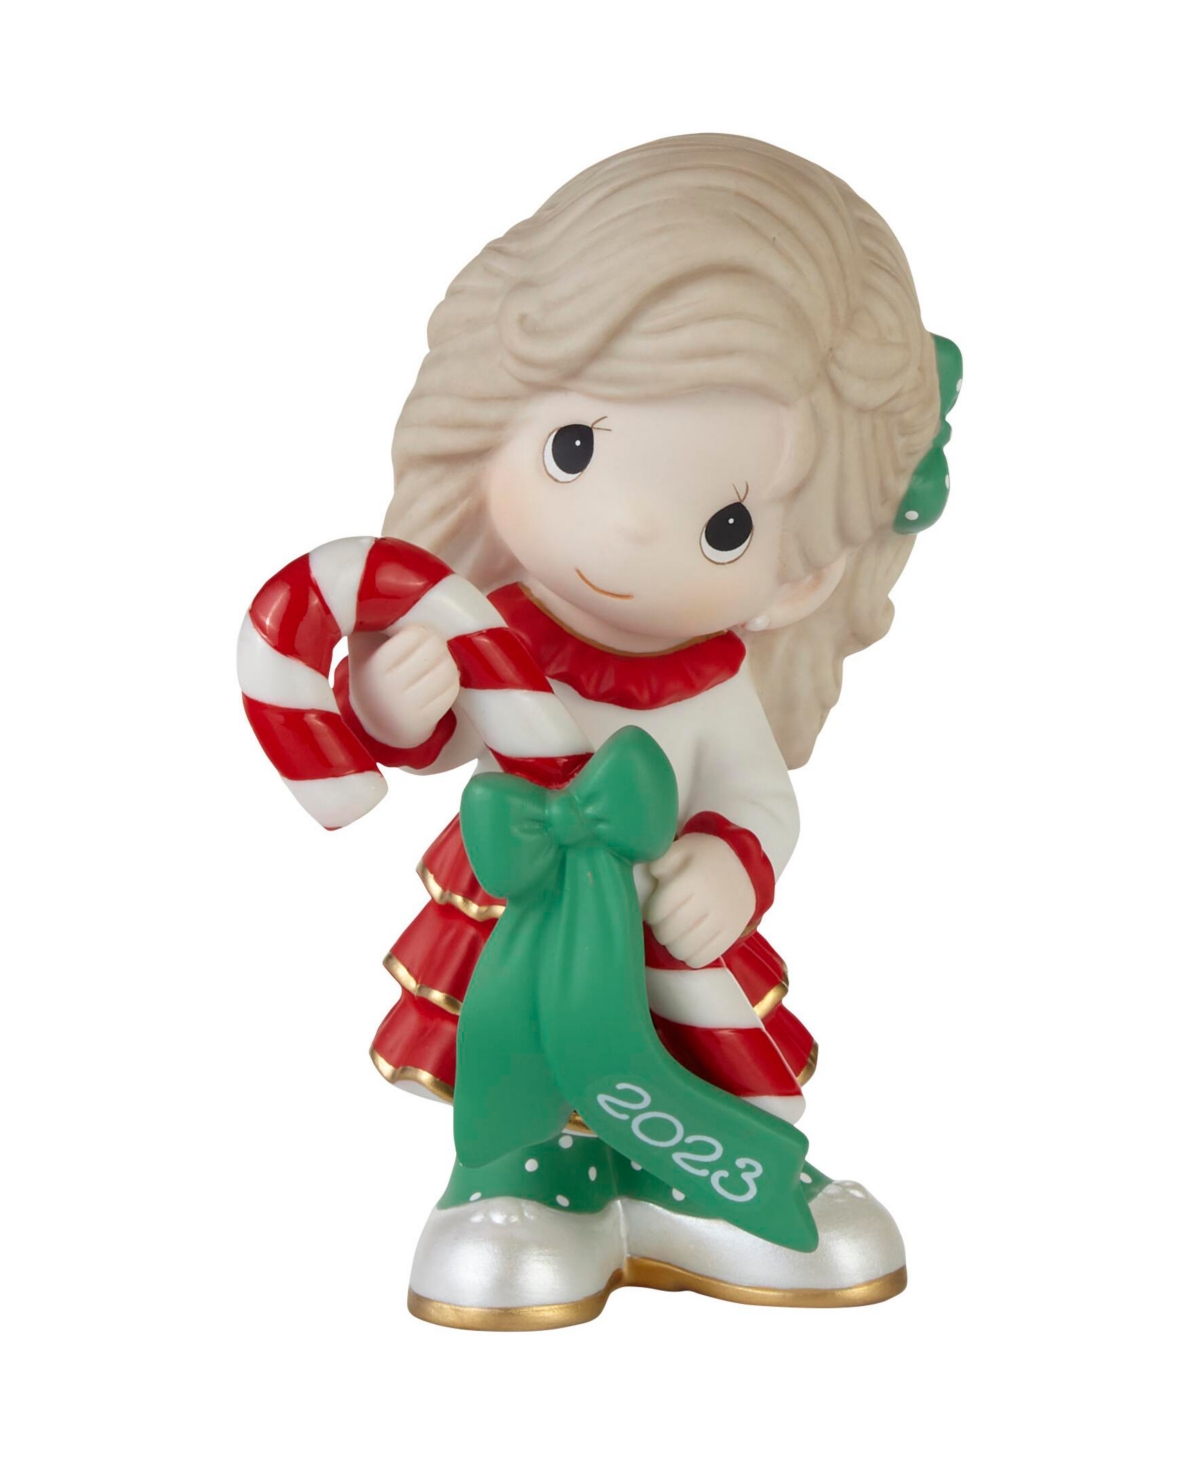 Precious Moments Sweet Christmas Wishes 2023 Dated Bisque Porcelain Figurine In Multicolored